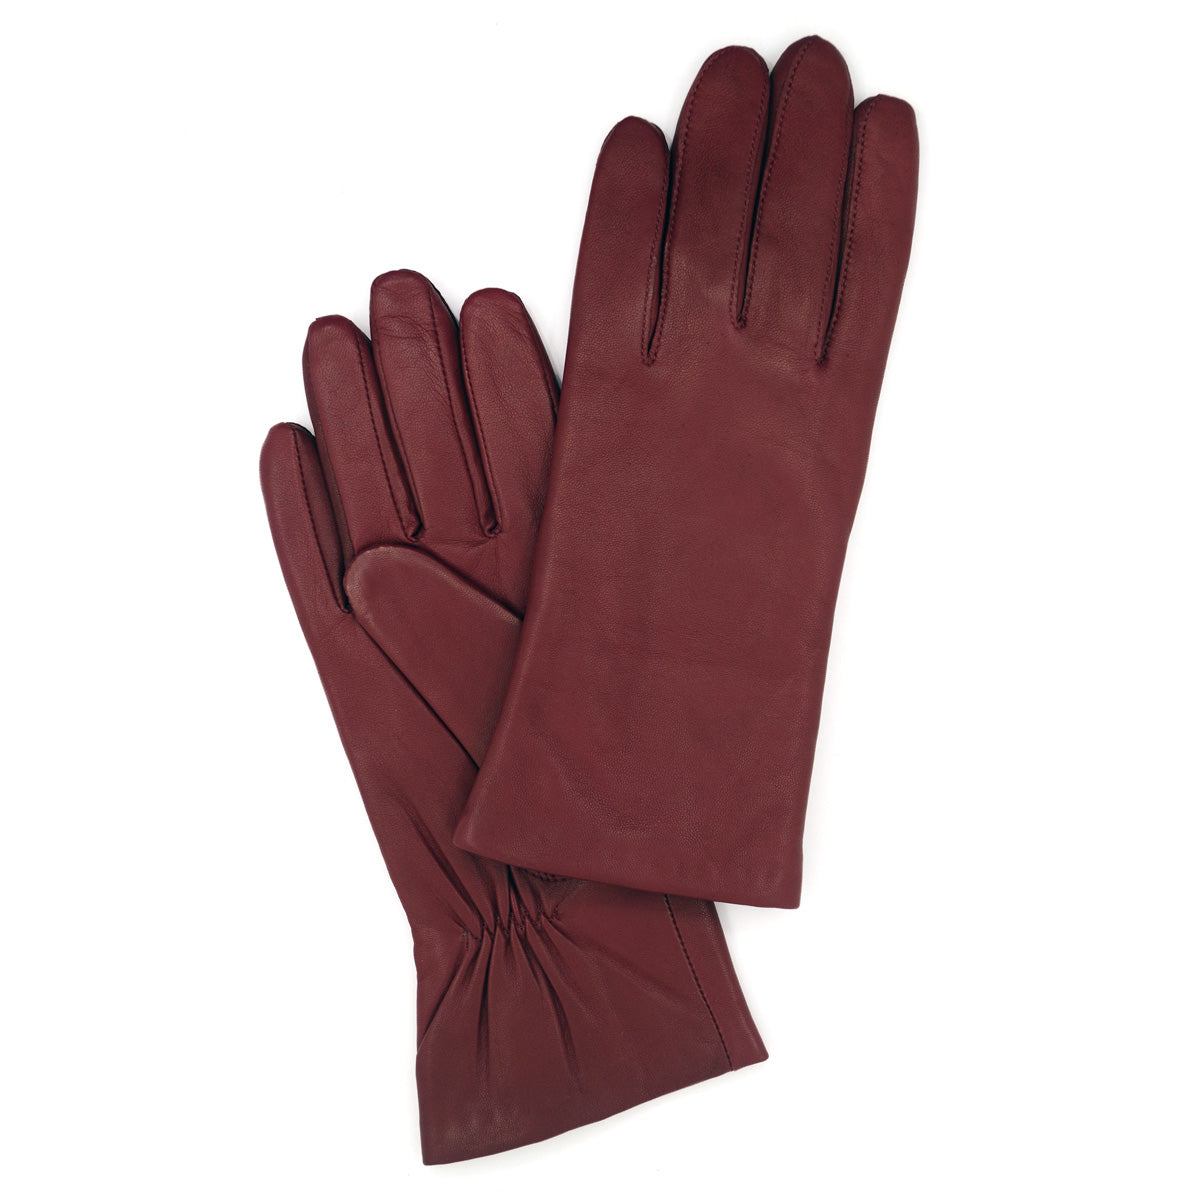 Brown lambskin leather gloves with cashmere lining - The Nines